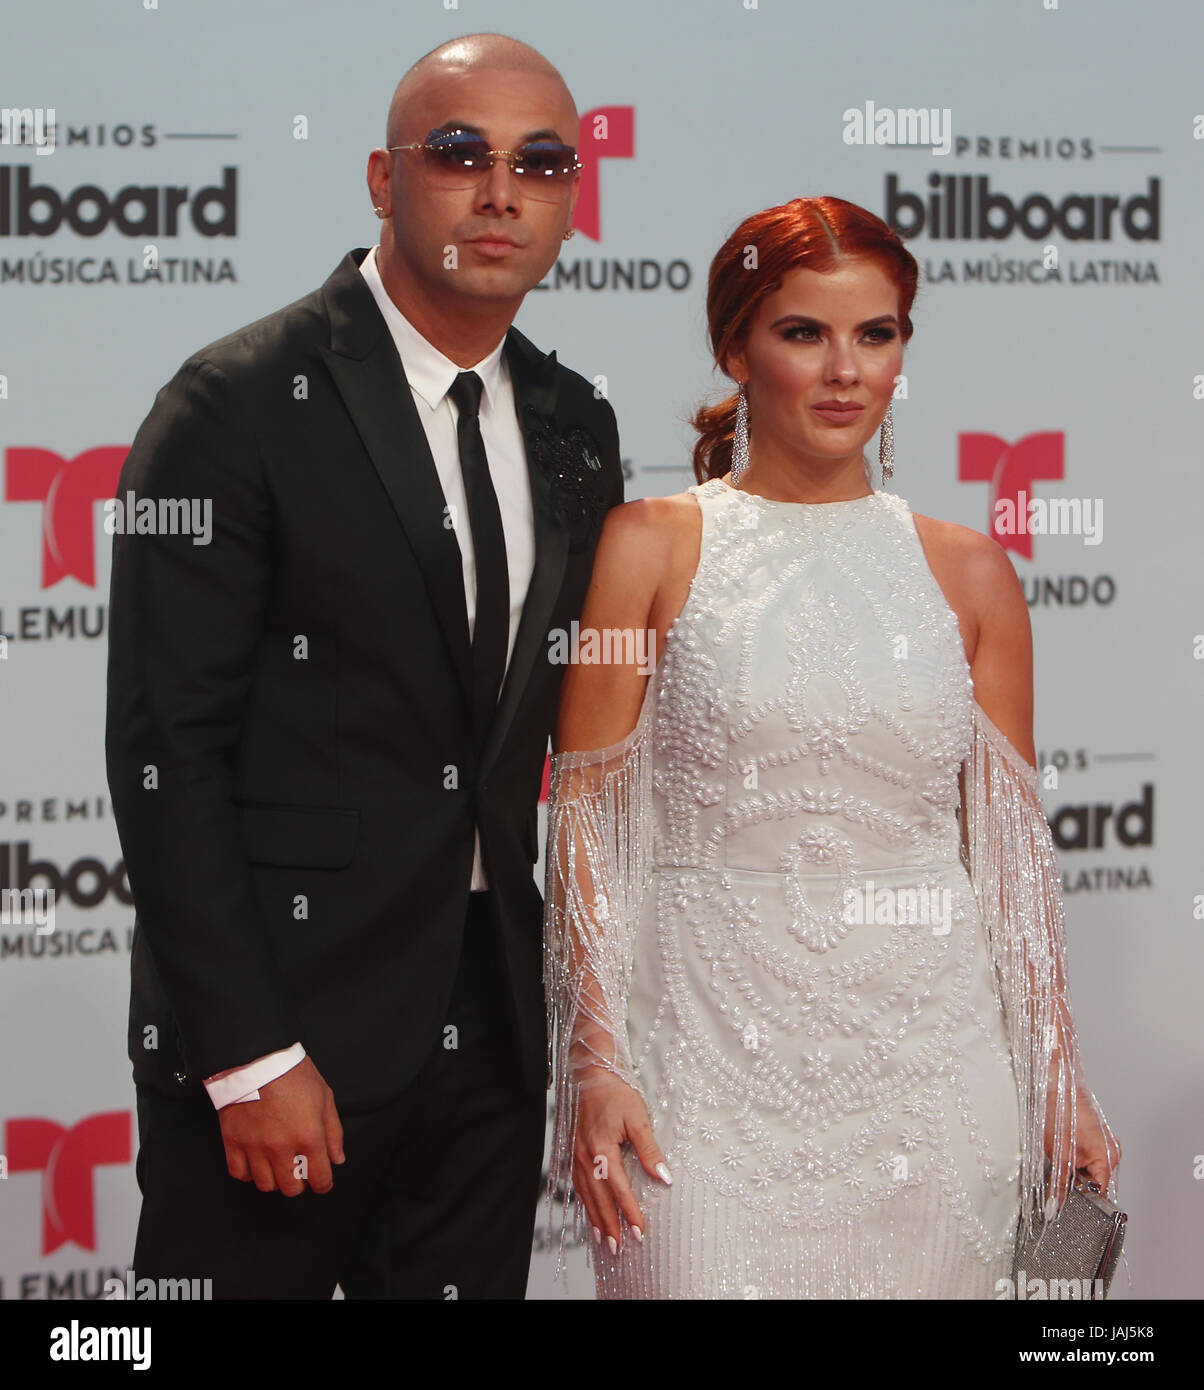 attends the Billboard Latin Music Awards at Watsco Center on April 27, 2017 in Miami, Florida.  Featuring: Wisin, Yomaira Ortiz Where: Coral Gables, Florida, United States When: 28 Apr 2017 Credit: JLN Photography/WENN.com Stock Photo